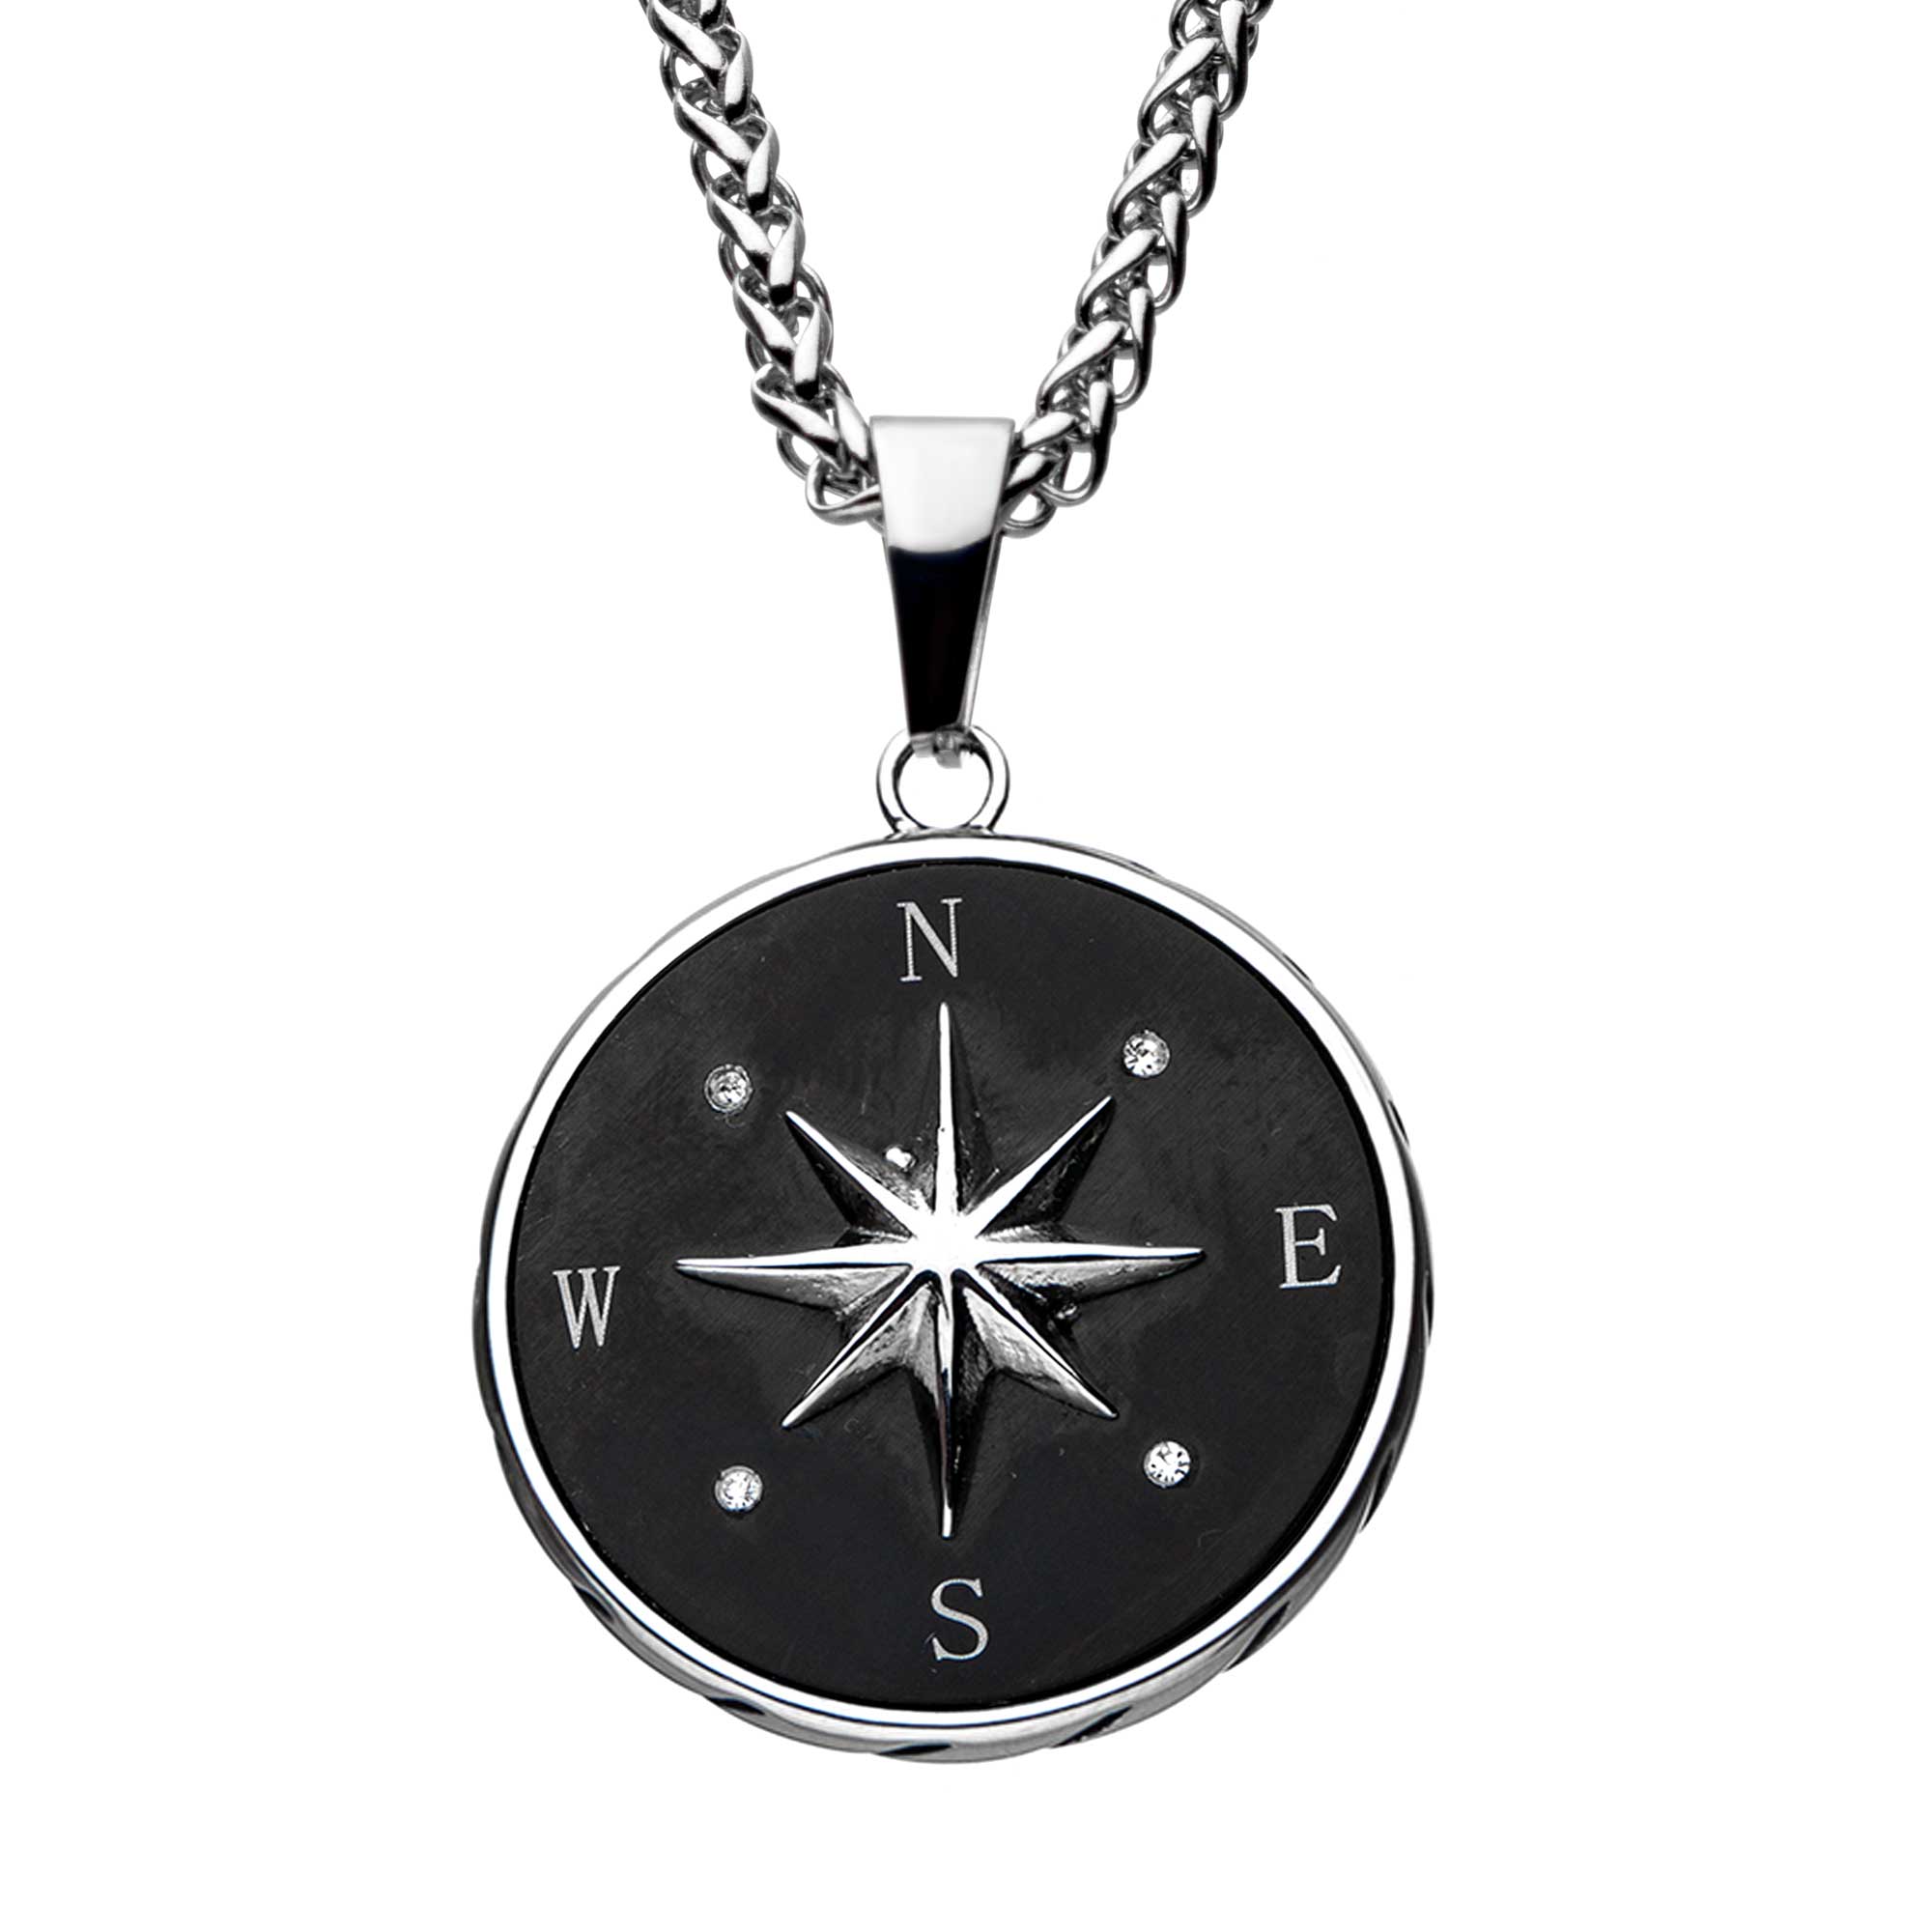 Stainless Steel and Black Plated Compass Pendant with Chain Enchanted Jewelry Plainfield, CT